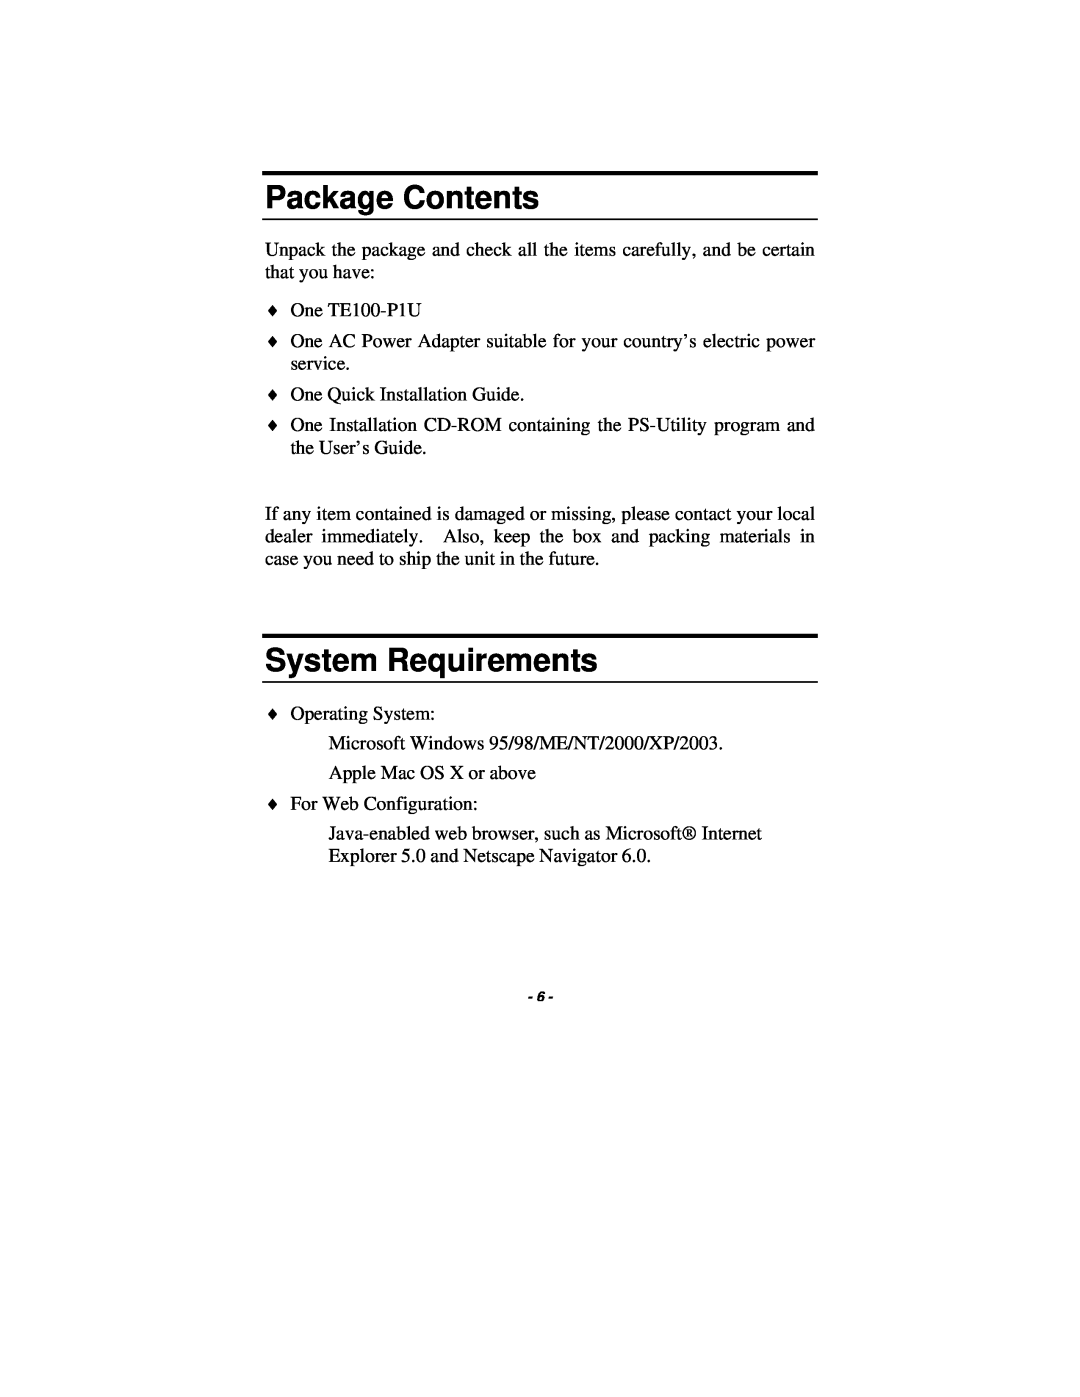 TRENDnet TE100-P1U manual Package Contents, System Requirements 